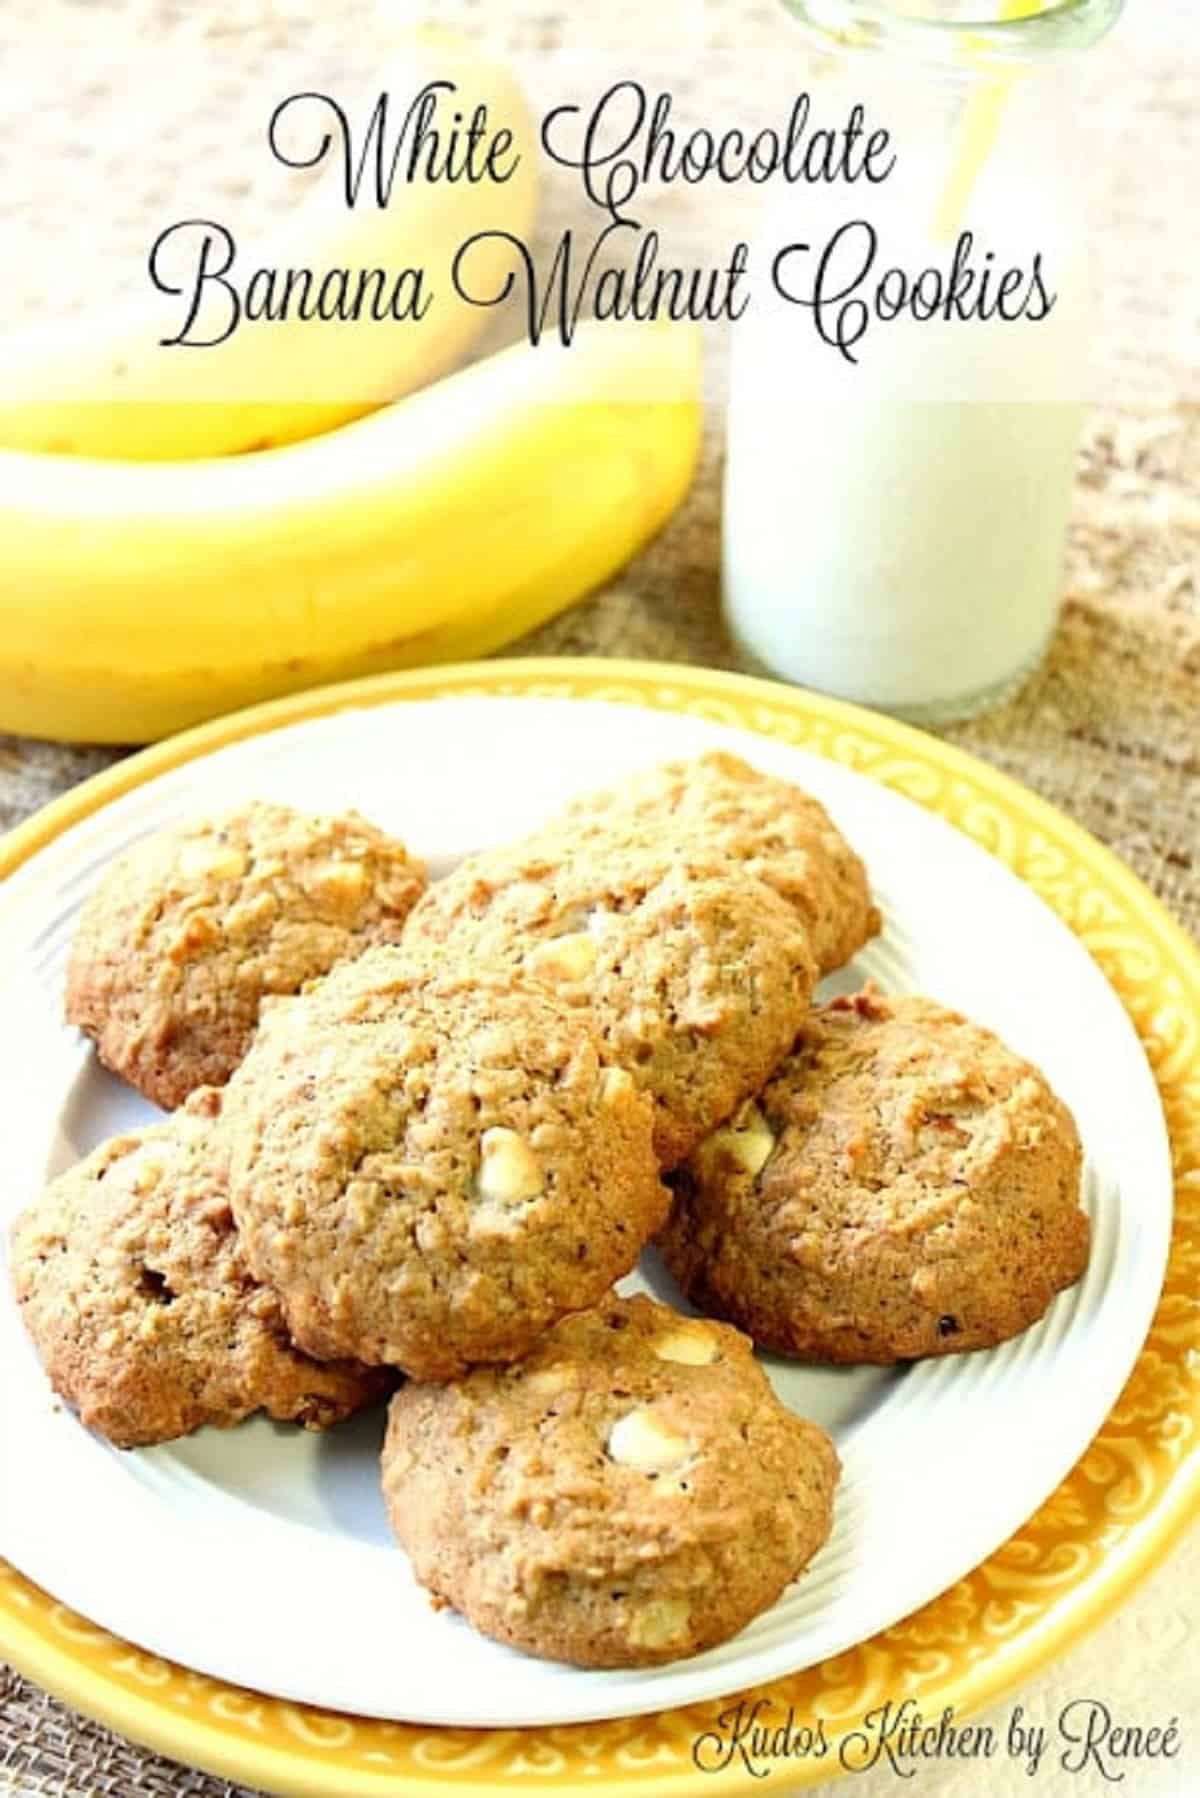 Several Banana Walnut Cookies on a plate with a glass of milk in the background.